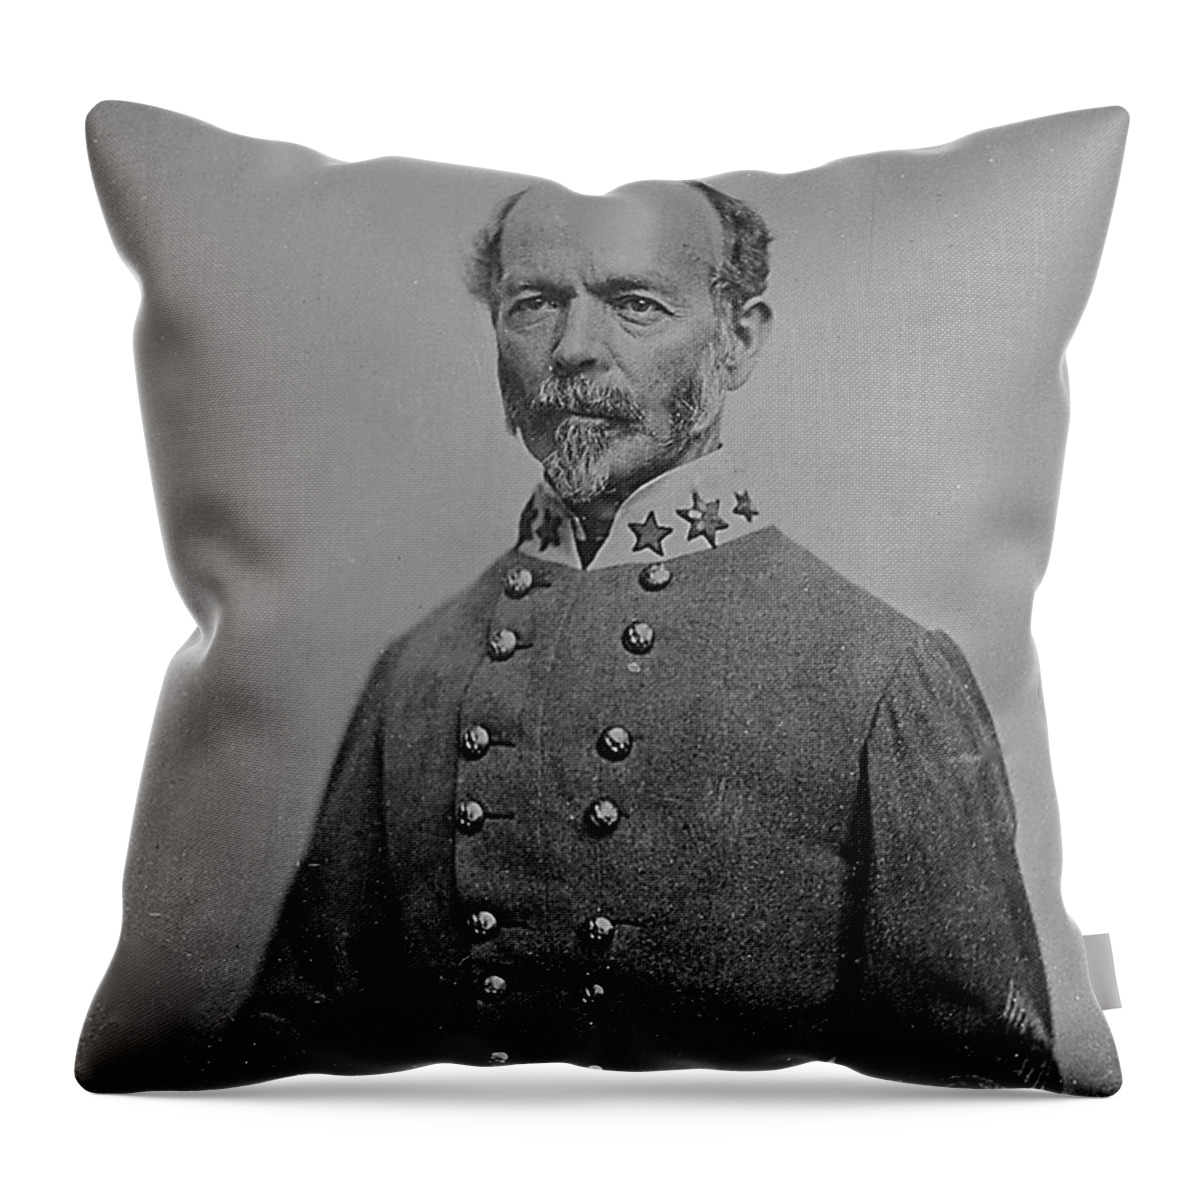 Civil War Throw Pillow featuring the painting Confederate General Joseph E. Johnston by Matthew Brady